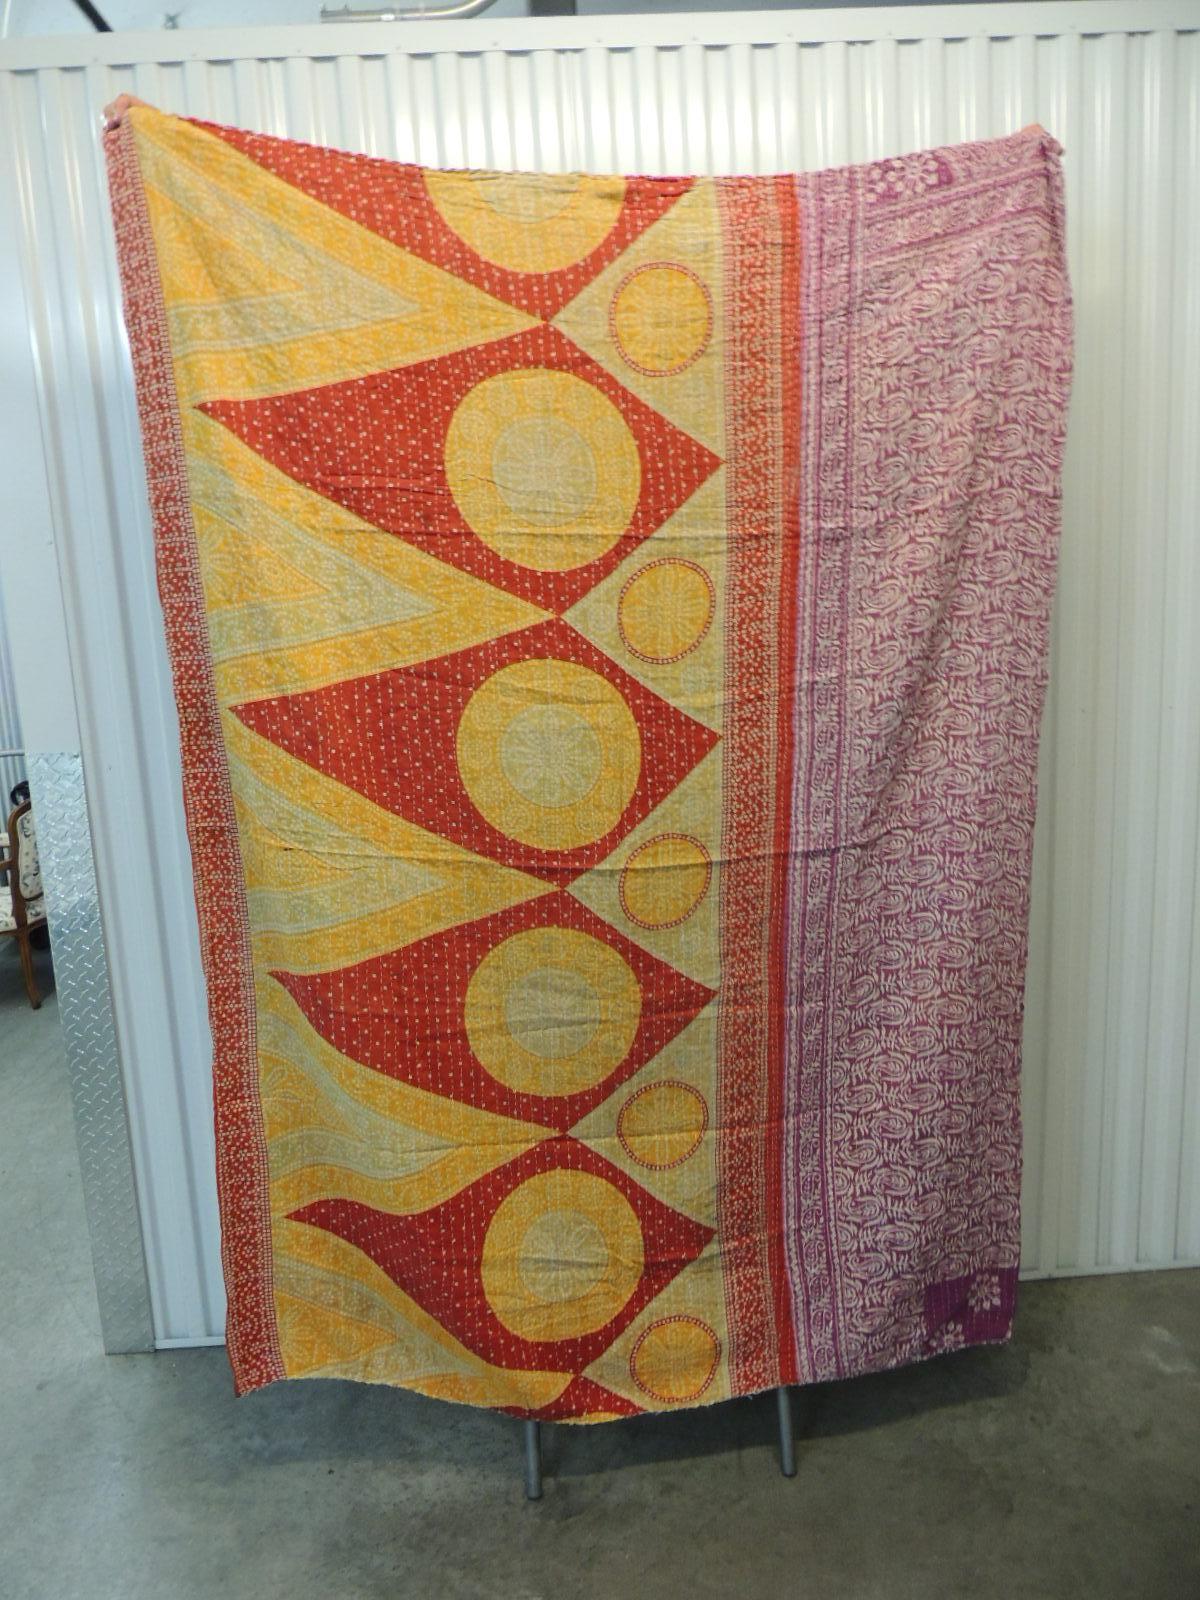 Bohemian Indian Kantha Colorful Quilted Throw with Triangles, Circles and Flowers